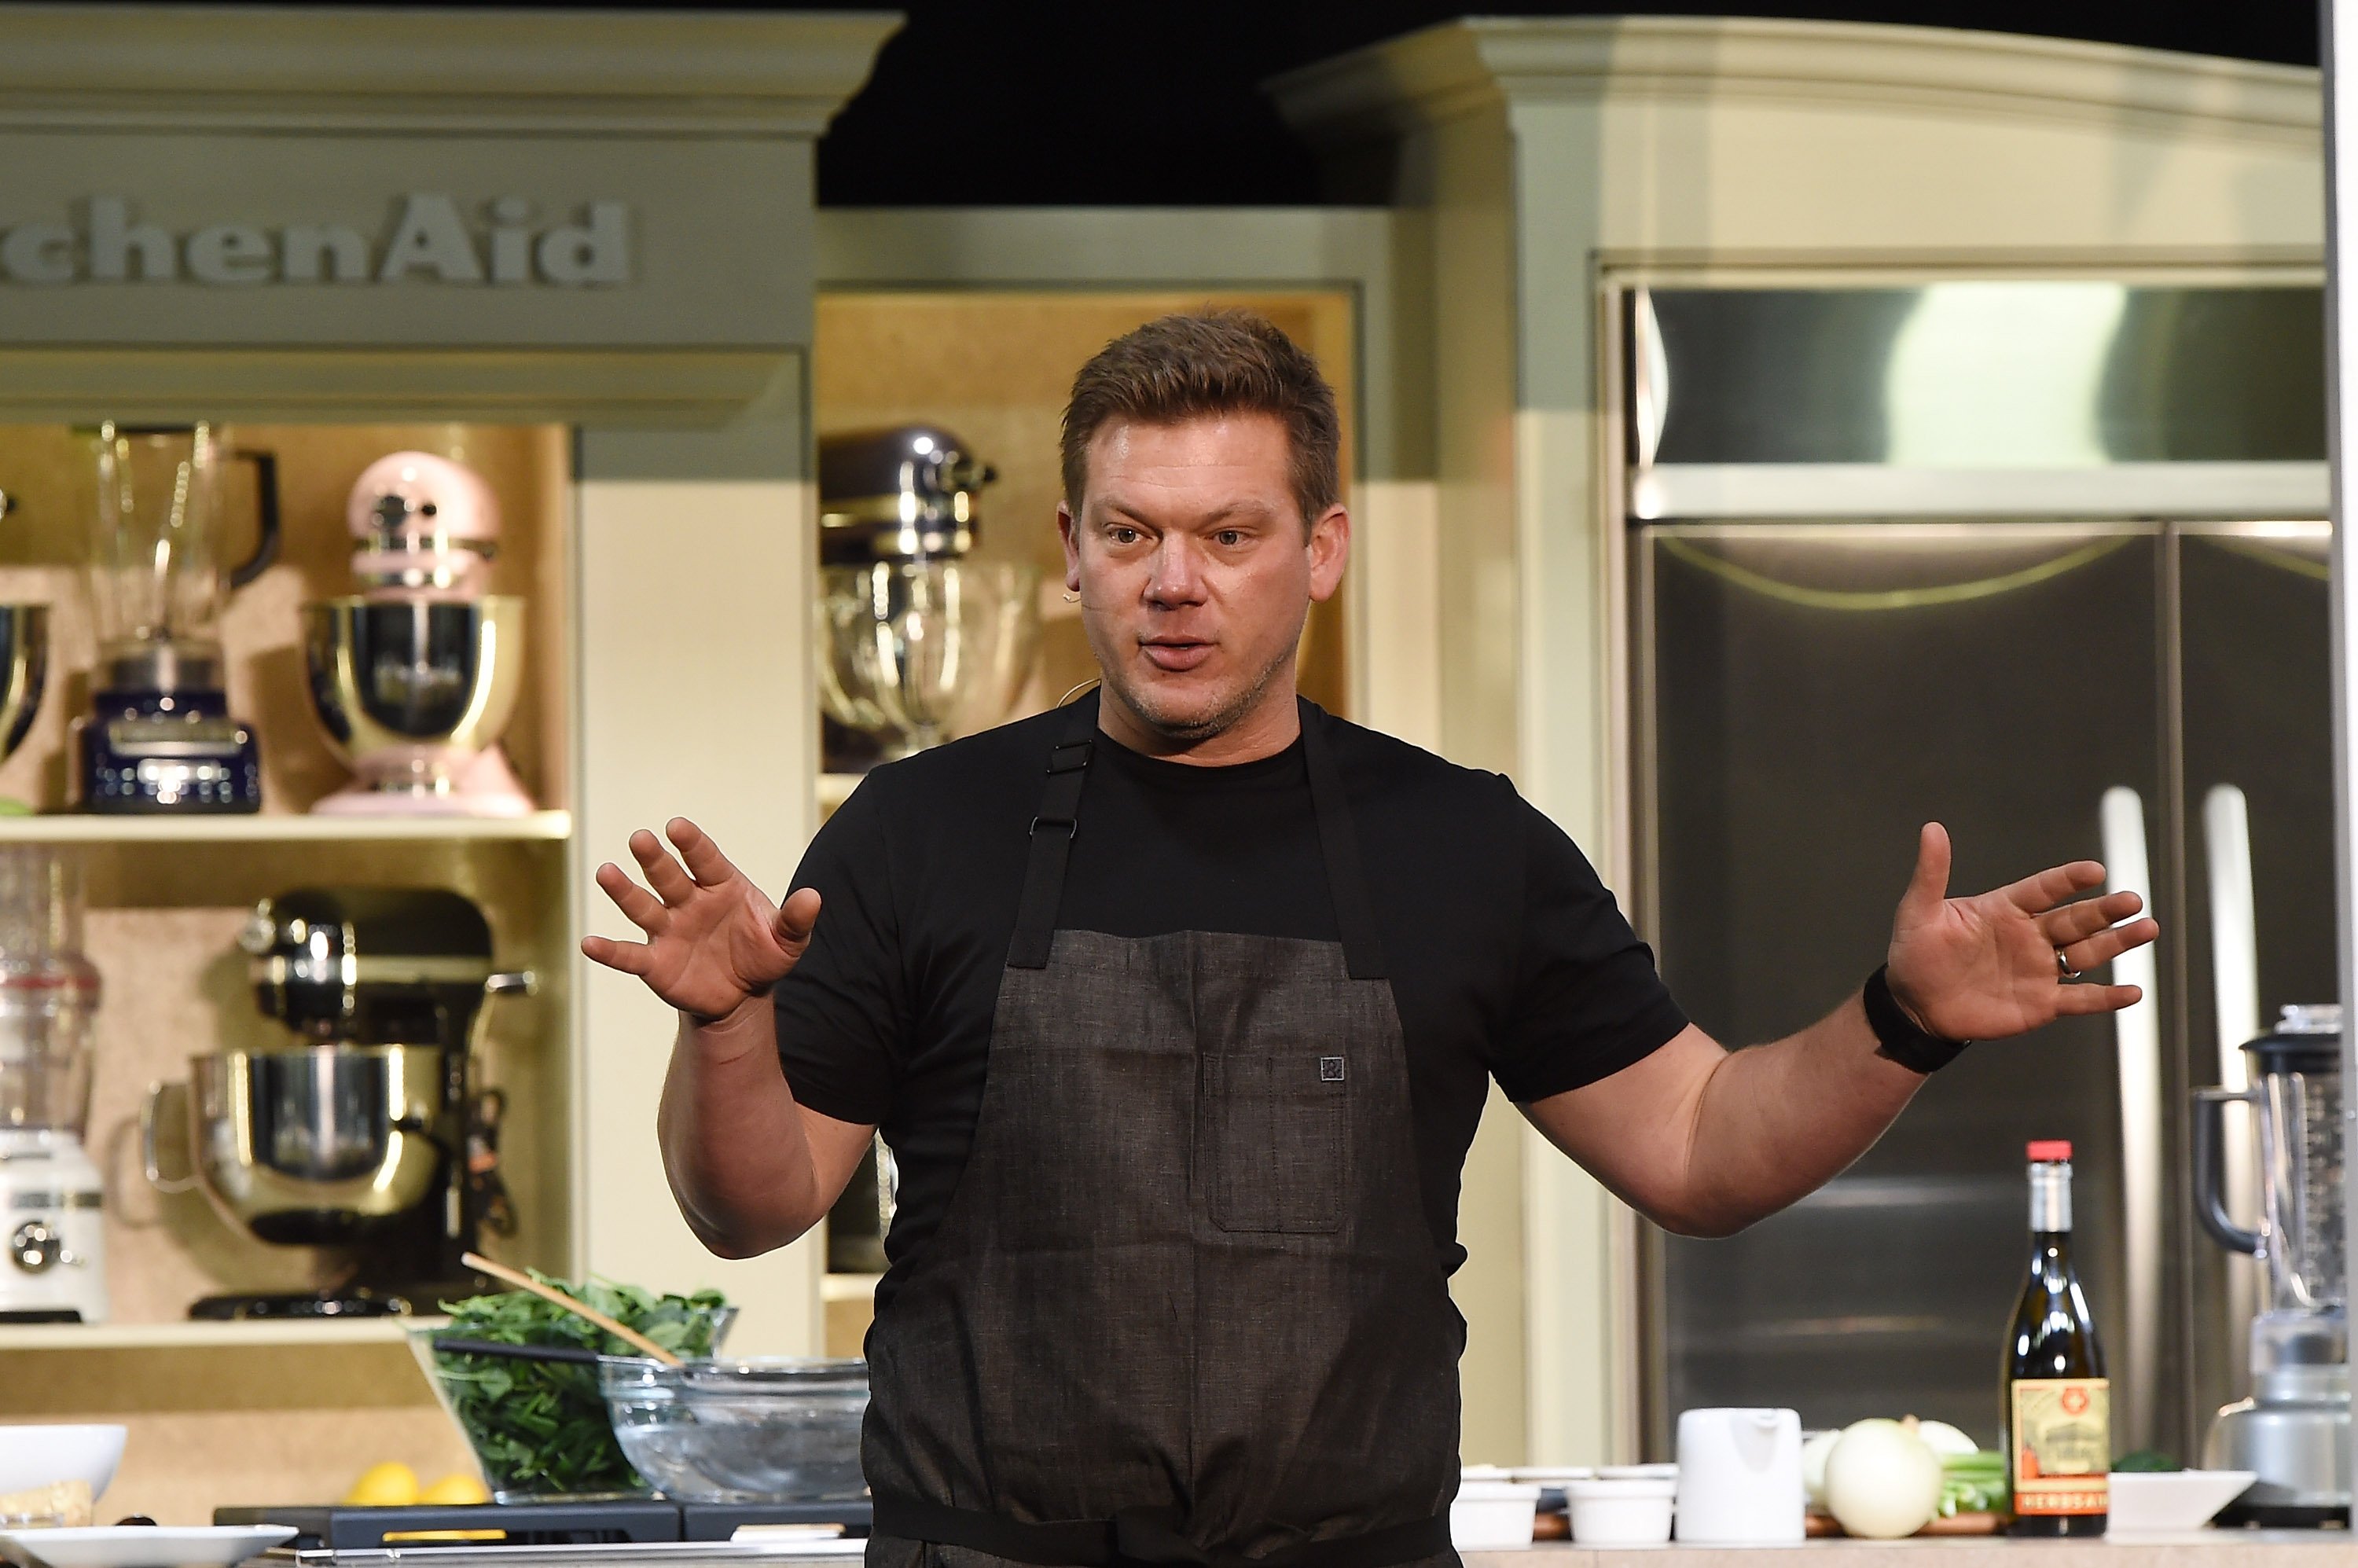 Food Network star Tyler Florence wears a black T-shirt in this photo.